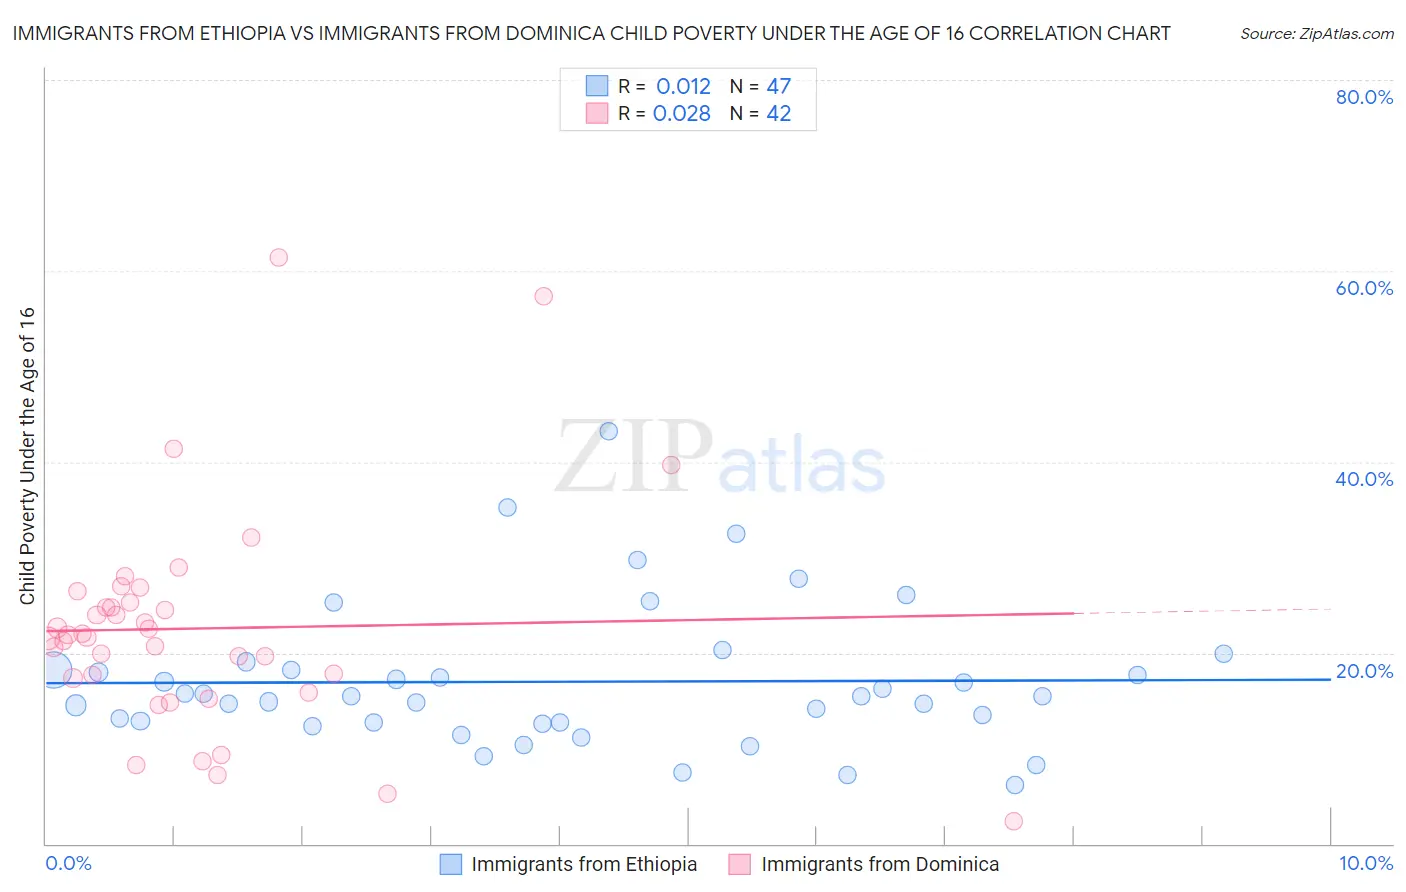 Immigrants from Ethiopia vs Immigrants from Dominica Child Poverty Under the Age of 16